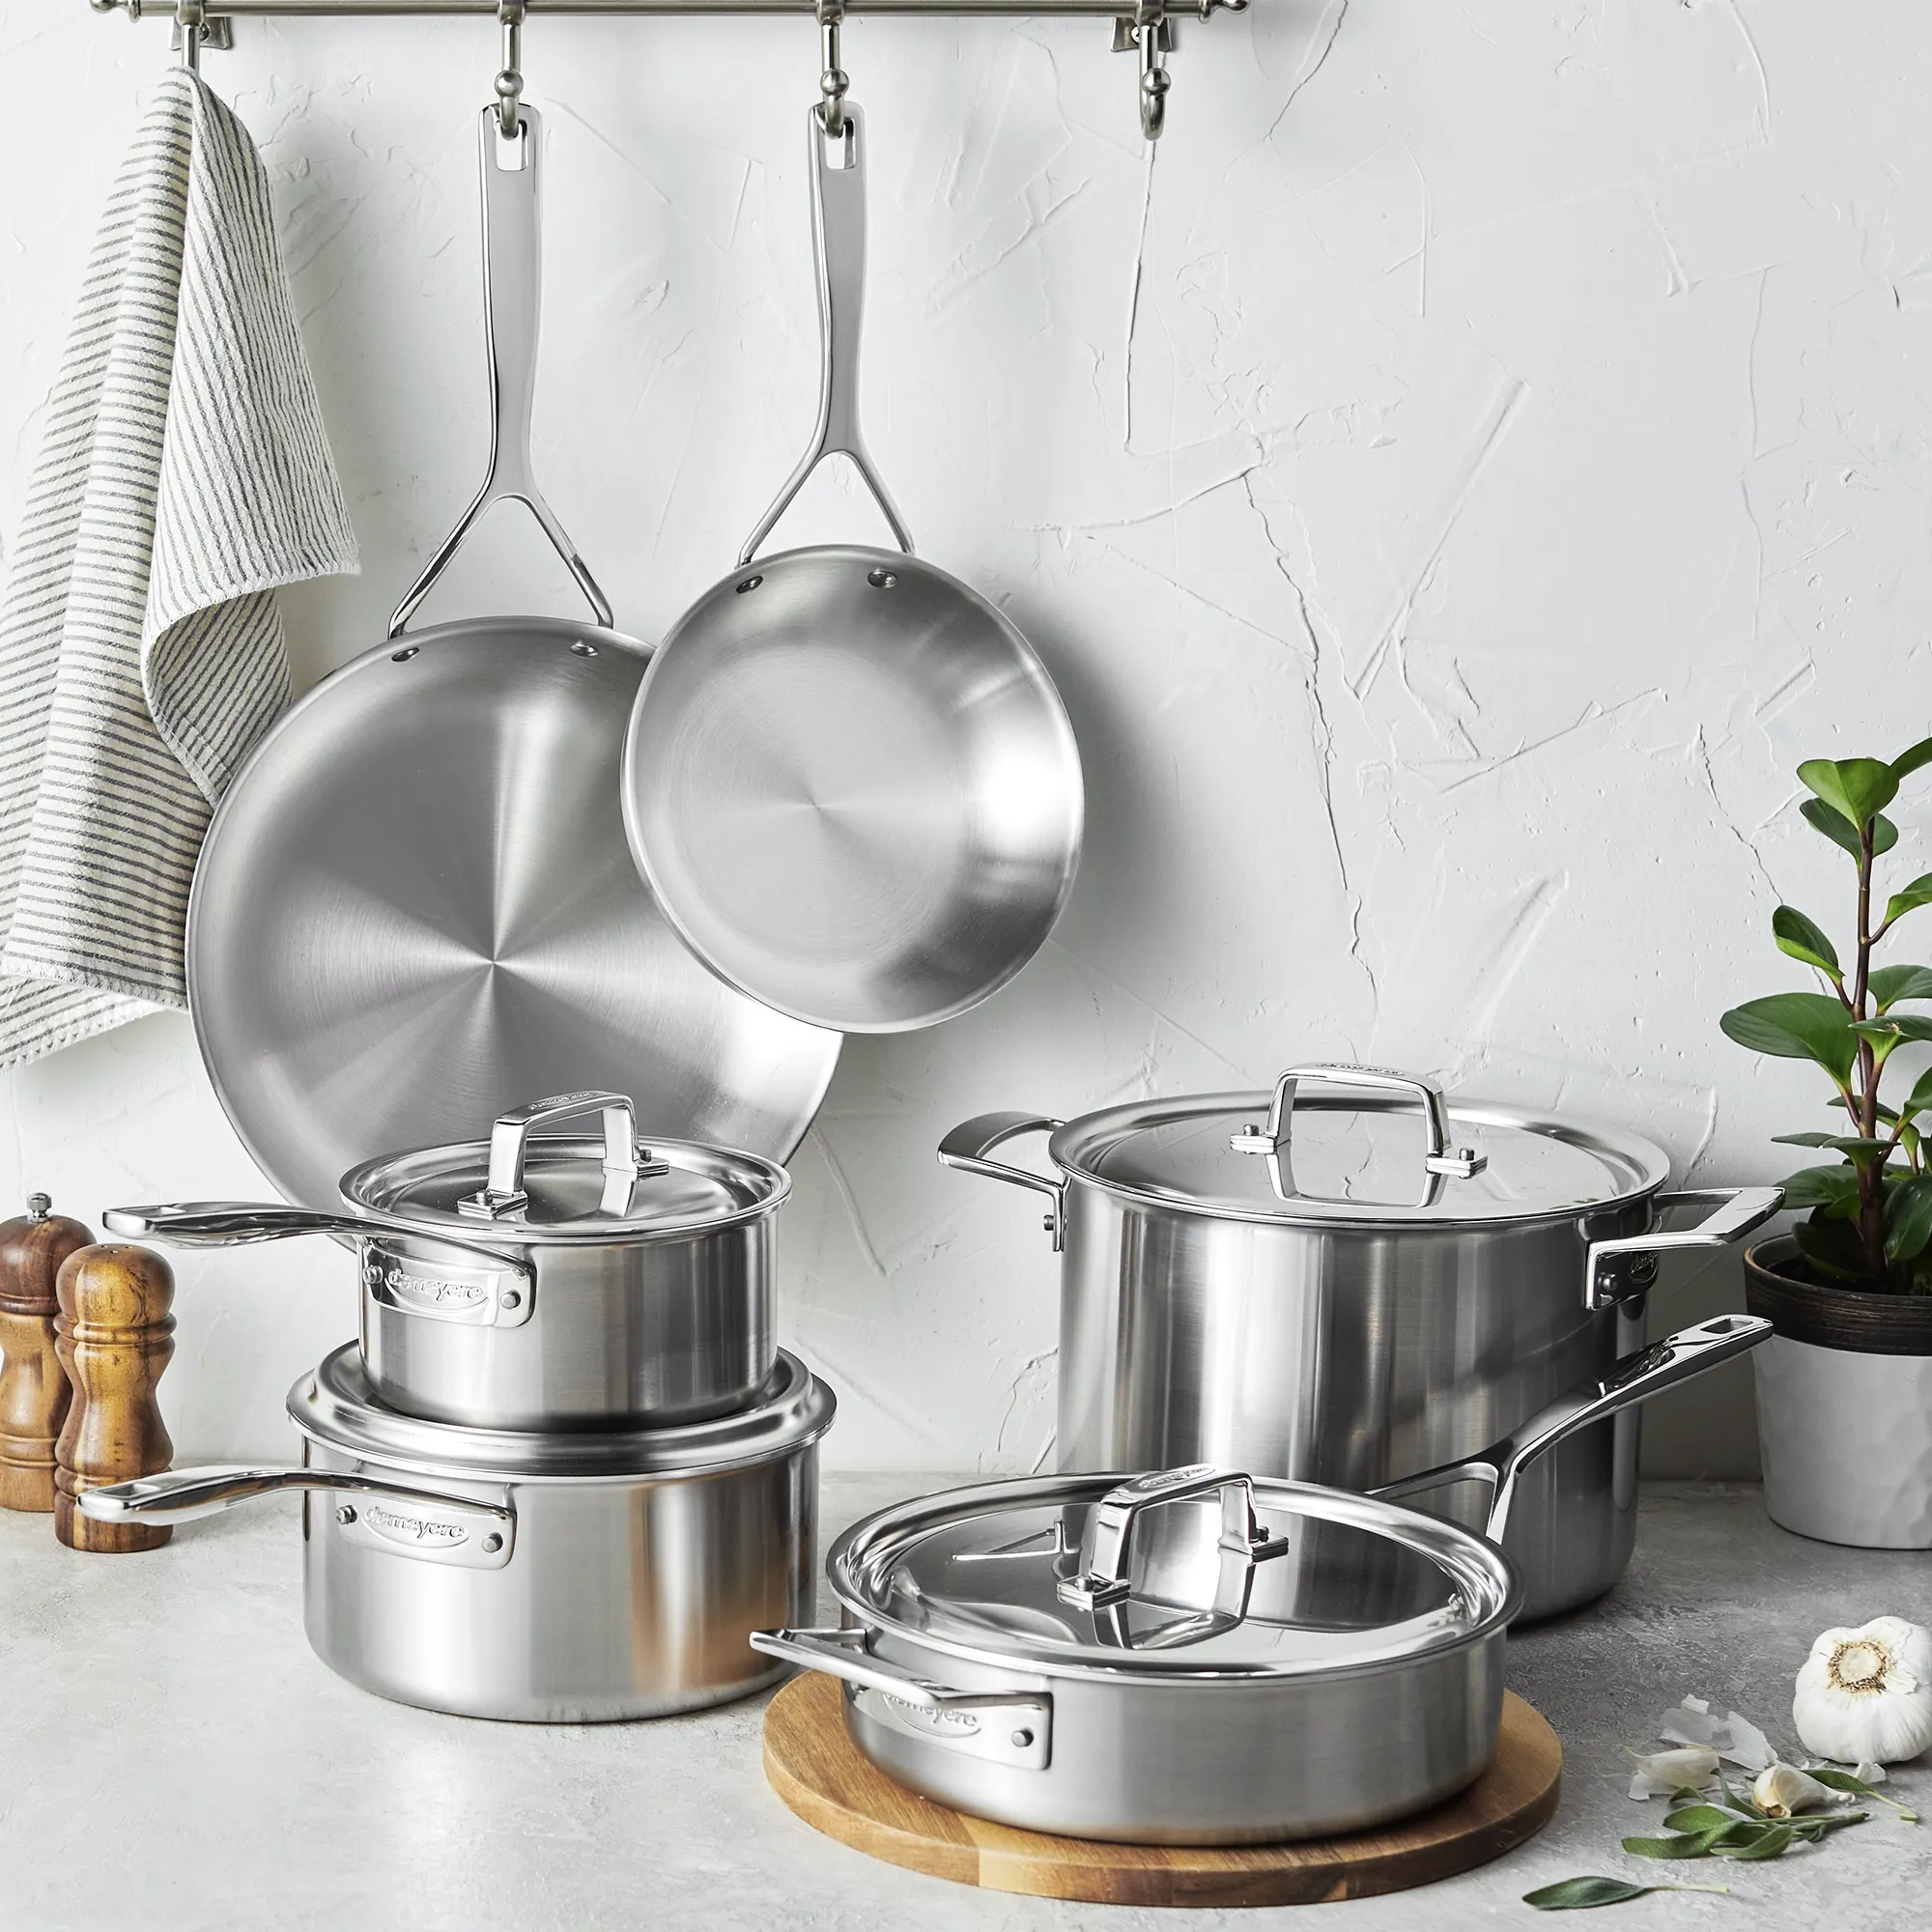 Made In Cookware - 10 Pc Stainless Steel Pot Pan Set - 5 Ply Clad 